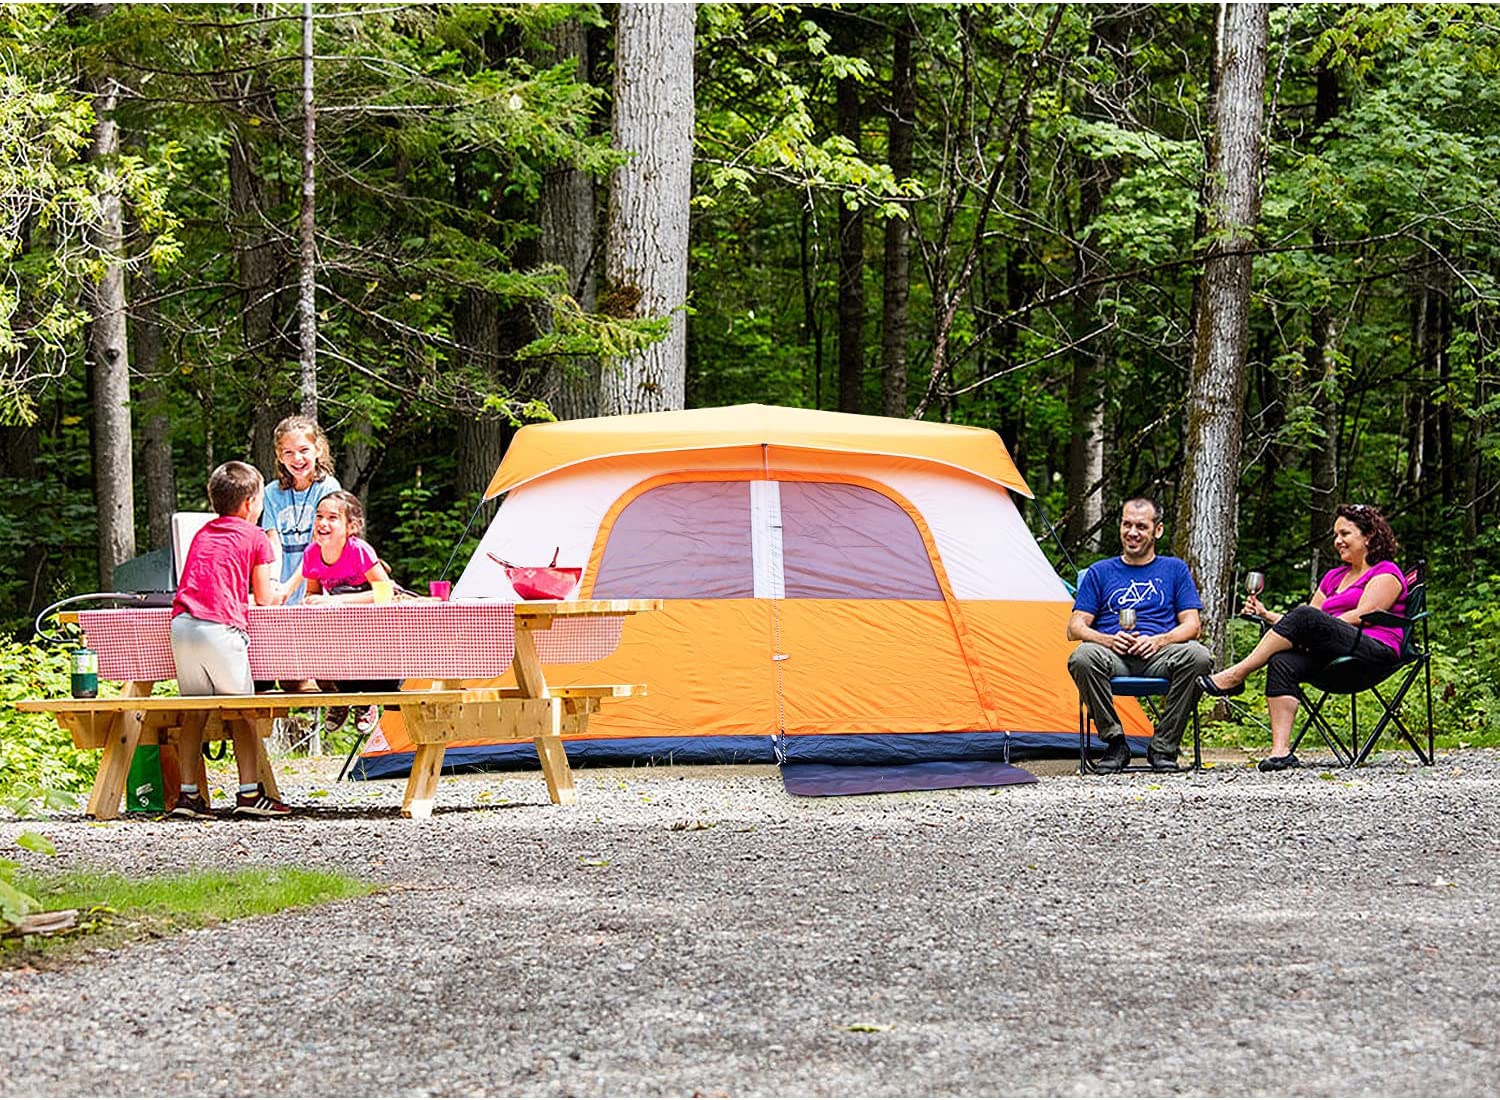 Koop 8 Persoons Familie Instant Camping Tent. 8 Persoons Familie Instant Camping Tent Prijzen. 8 Persoons Familie Instant Camping Tent Brands. 8 Persoons Familie Instant Camping Tent Fabrikant. 8 Persoons Familie Instant Camping Tent Quotes. 8 Persoons Familie Instant Camping Tent Company.